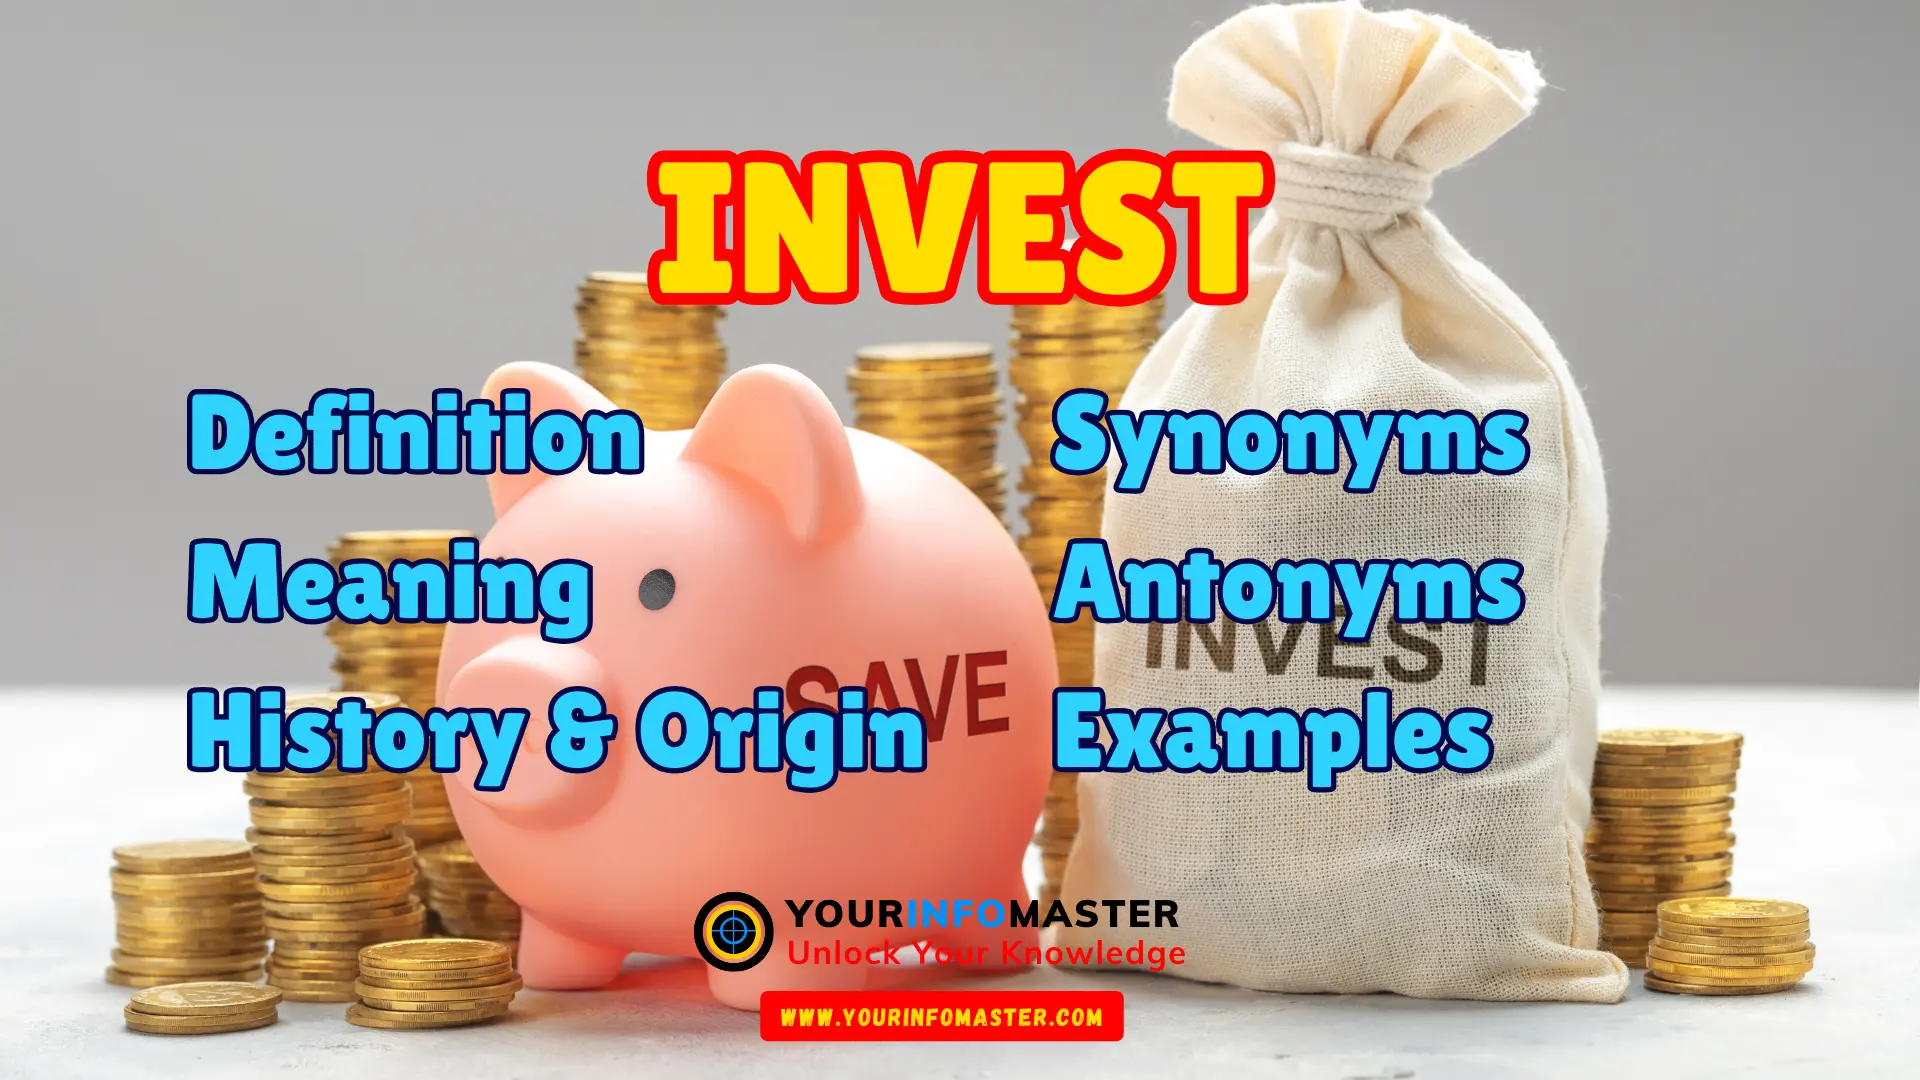 Invest Synonyms, Antonyms, Example Sentences